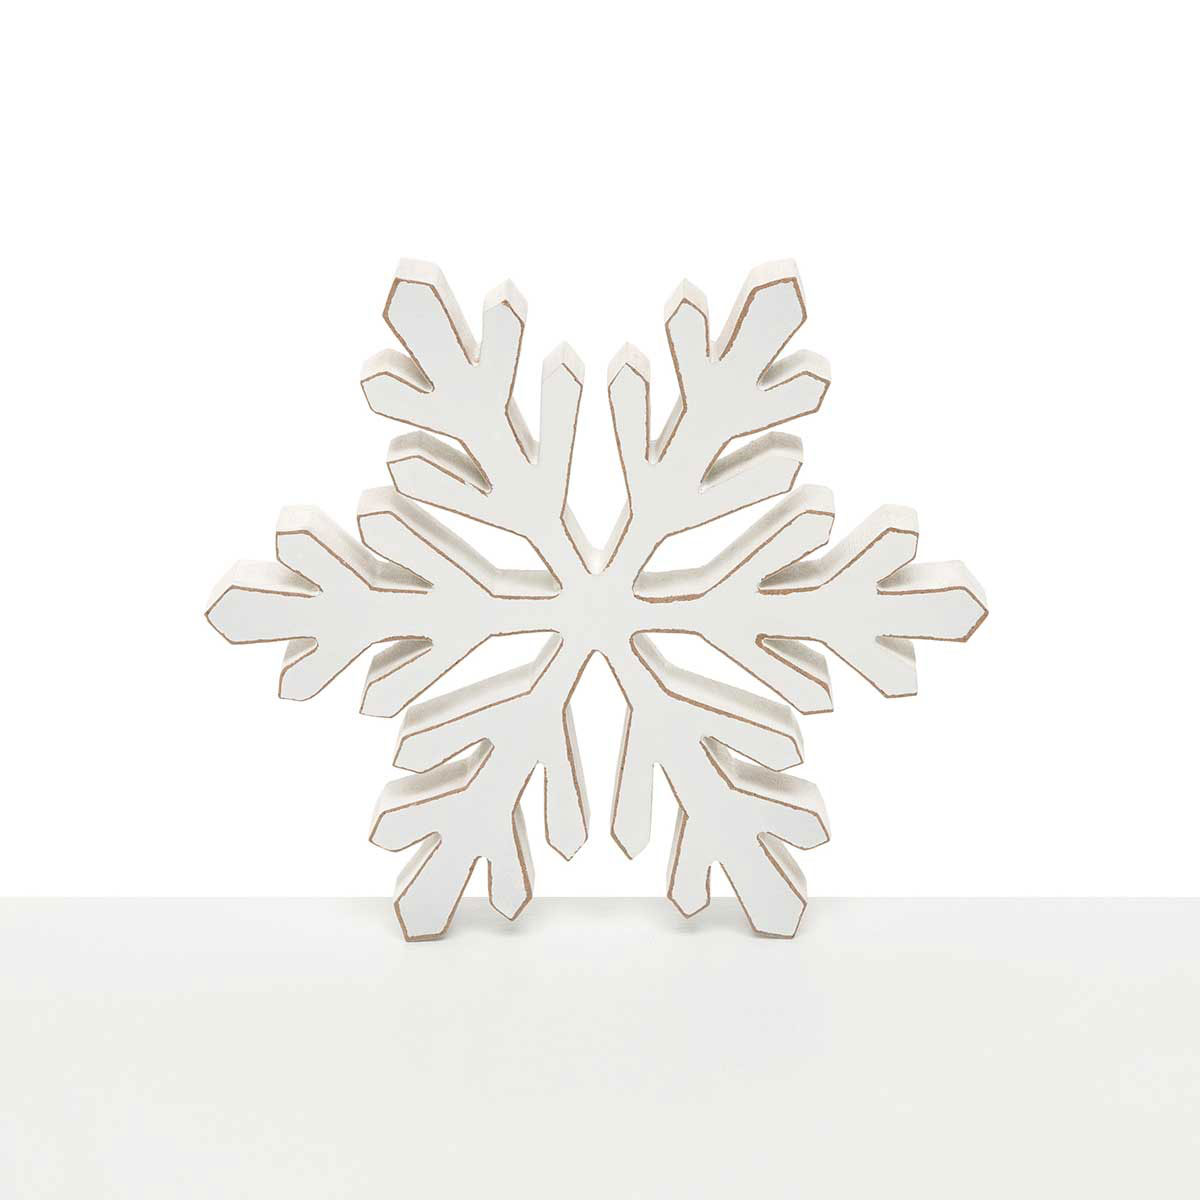 SIT-A-BOUT SNOWFLAKE SMALL 6IN X .75IN X 6IN WHITE WOOD